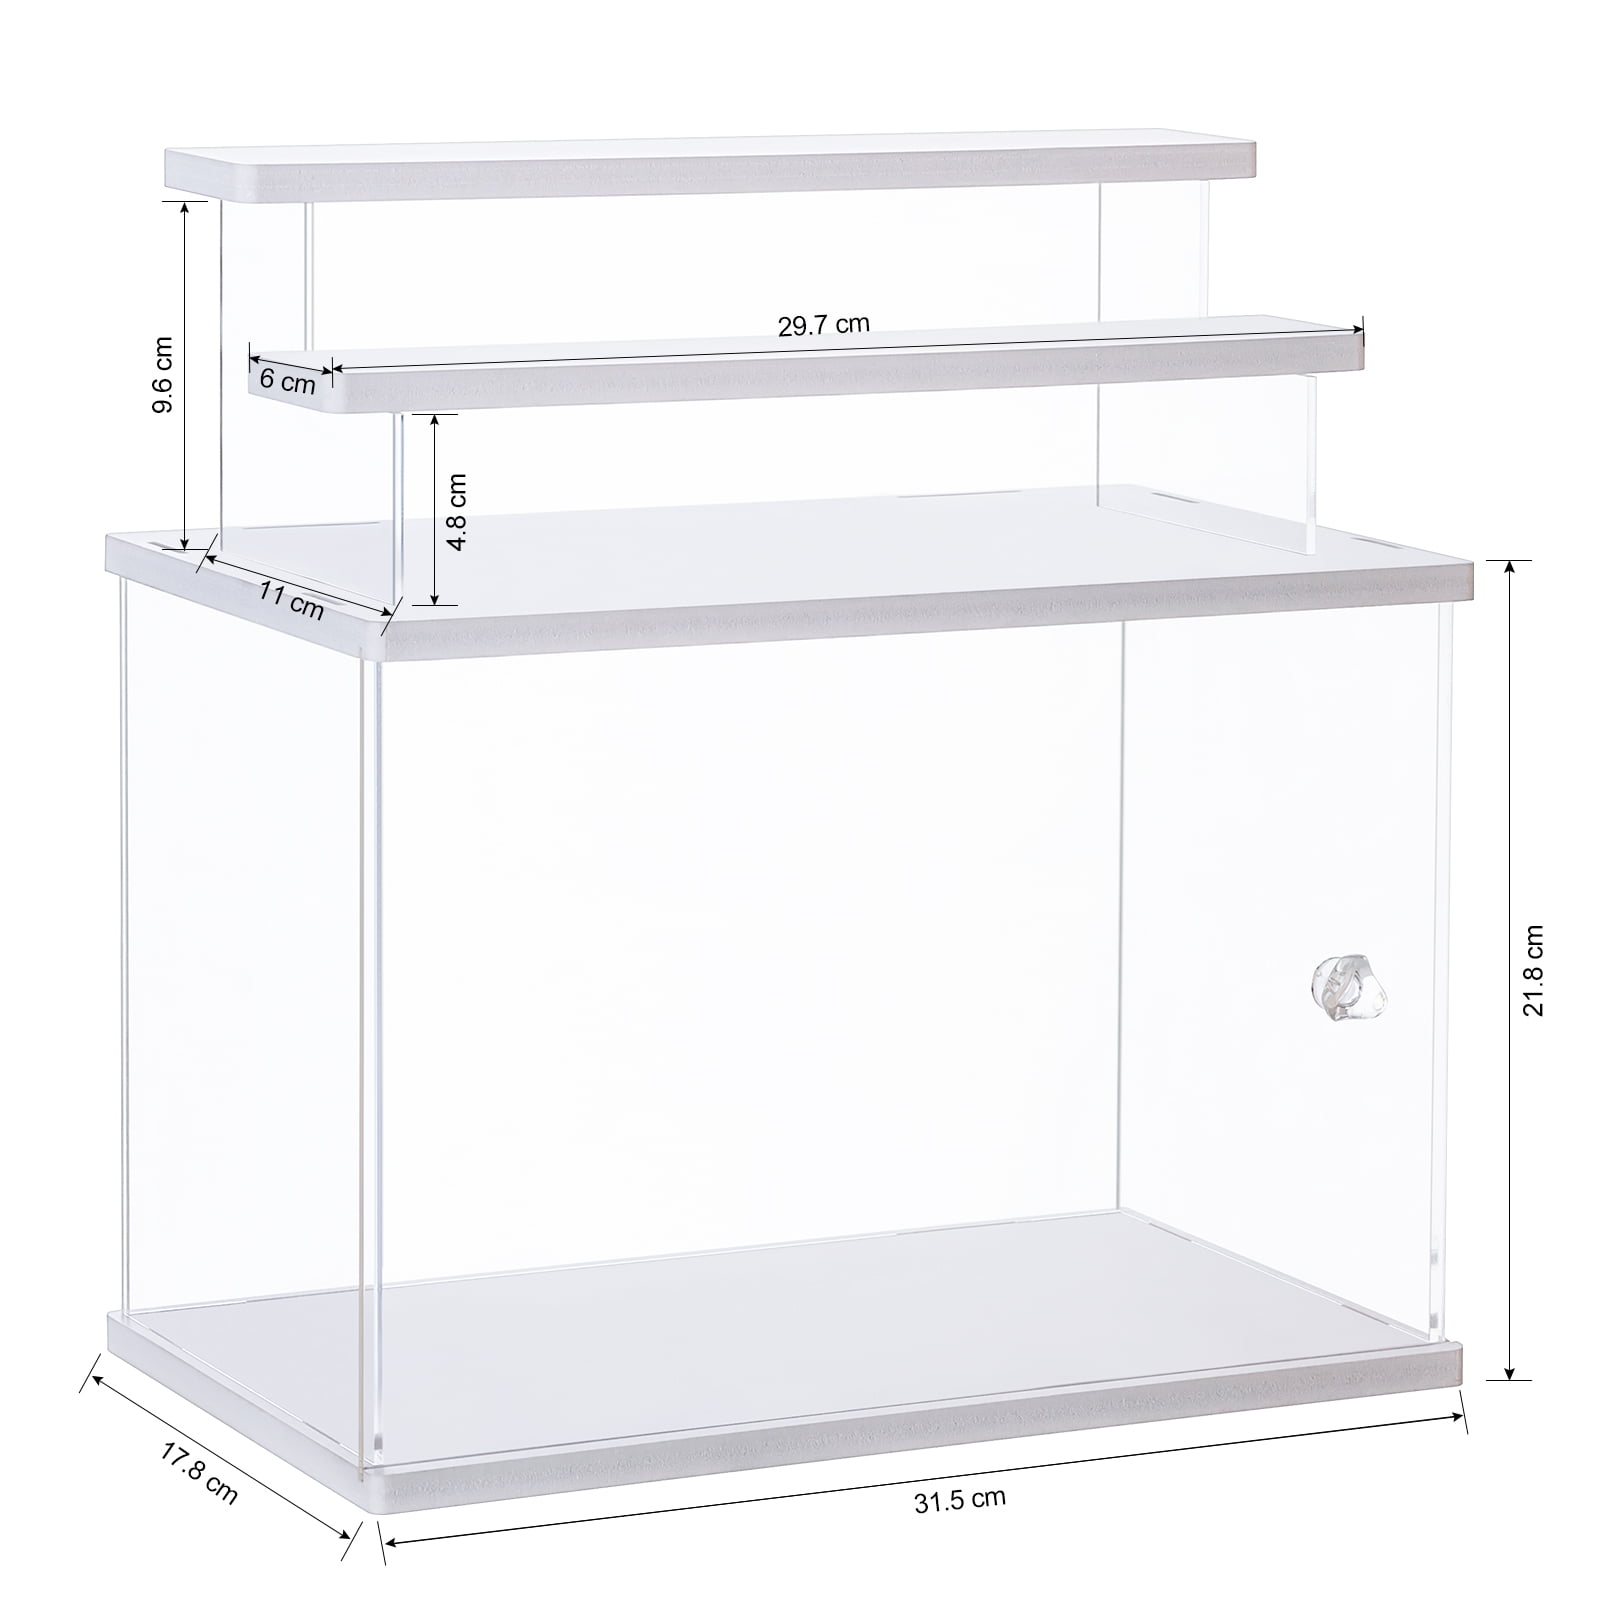 3" Lighted Clear Acrylic Display Stand Easel 